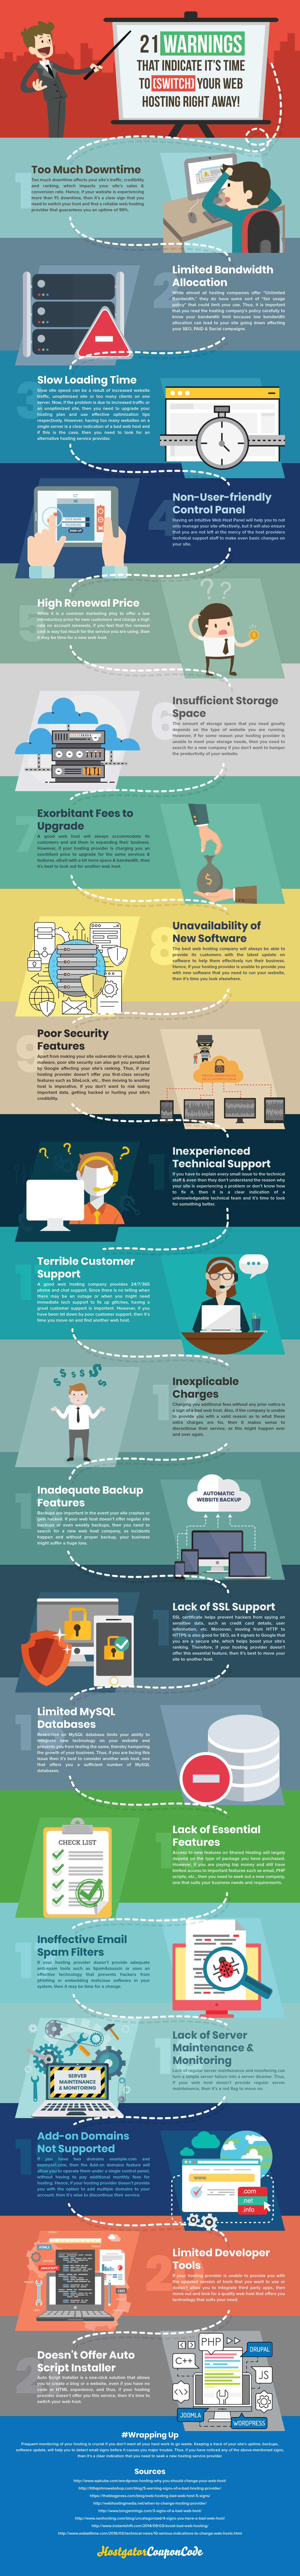 Switch Your Web Hosting - Warning Signs - Infographic